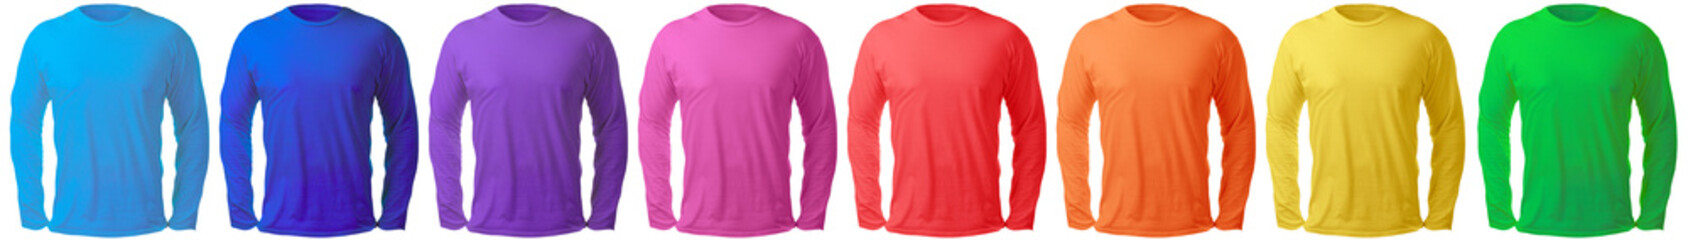 Long Sleeved Shirt Design Template in Many Color